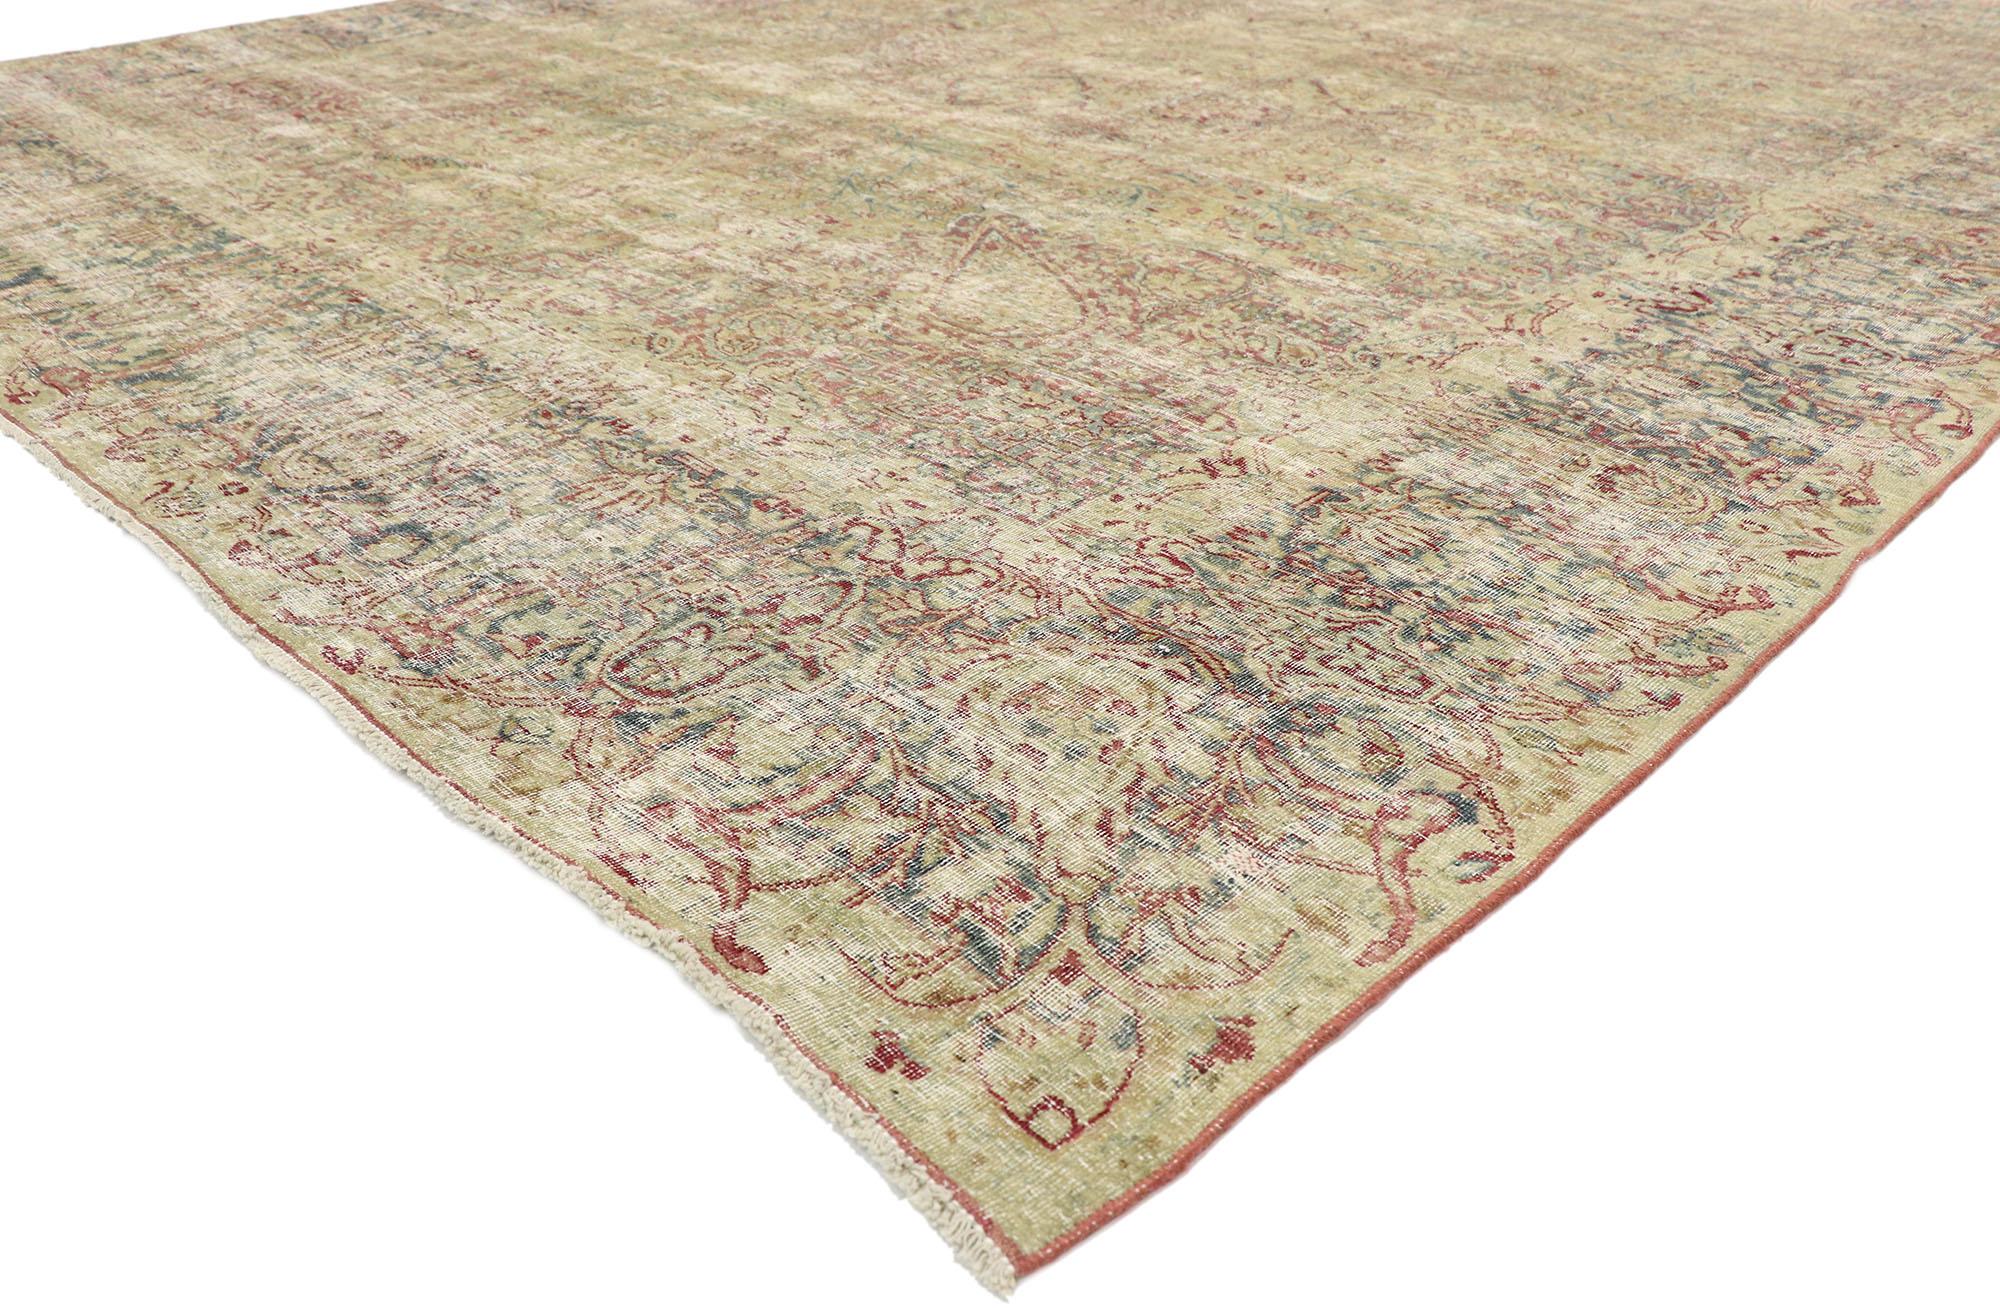 51525, distressed antique Persian Kerman rug with modern Rustic English cottage style. Balancing a timeless floral design with traditional sensibility and a lovingly timeworn patina, this hand knotted wool distressed antique Persian Kerman rug